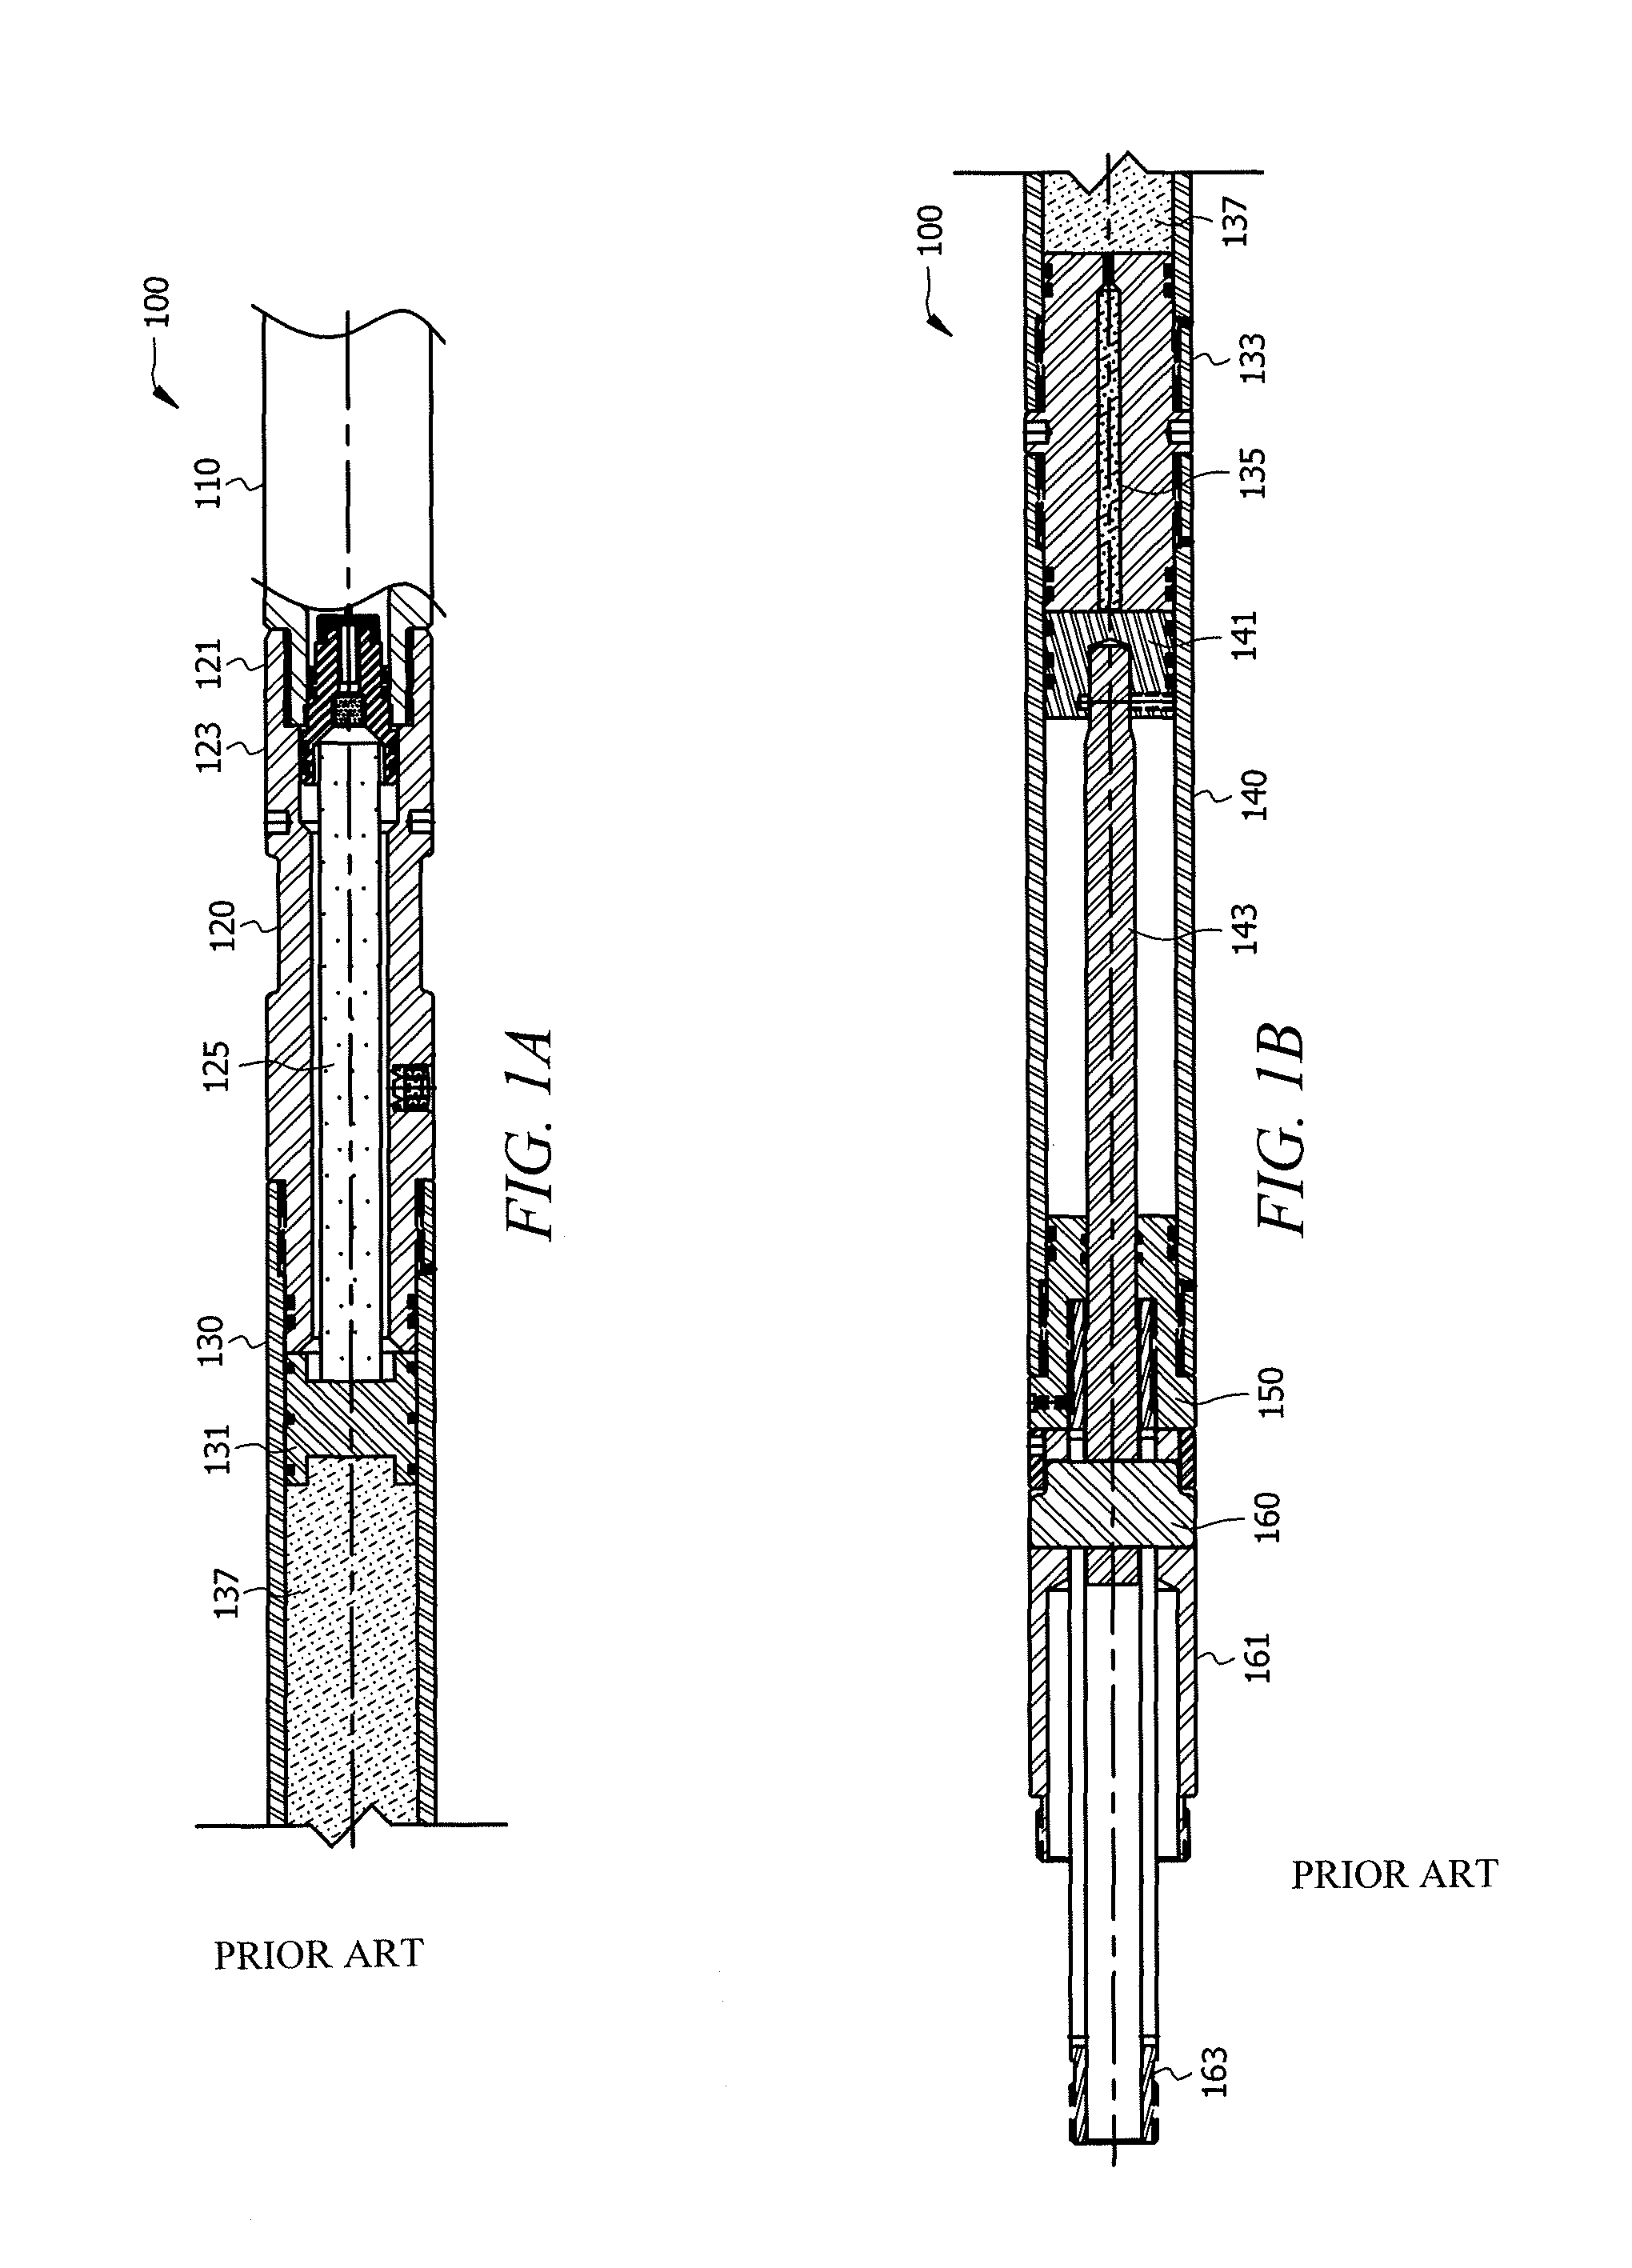 Wireline pressure setting tool and method of use